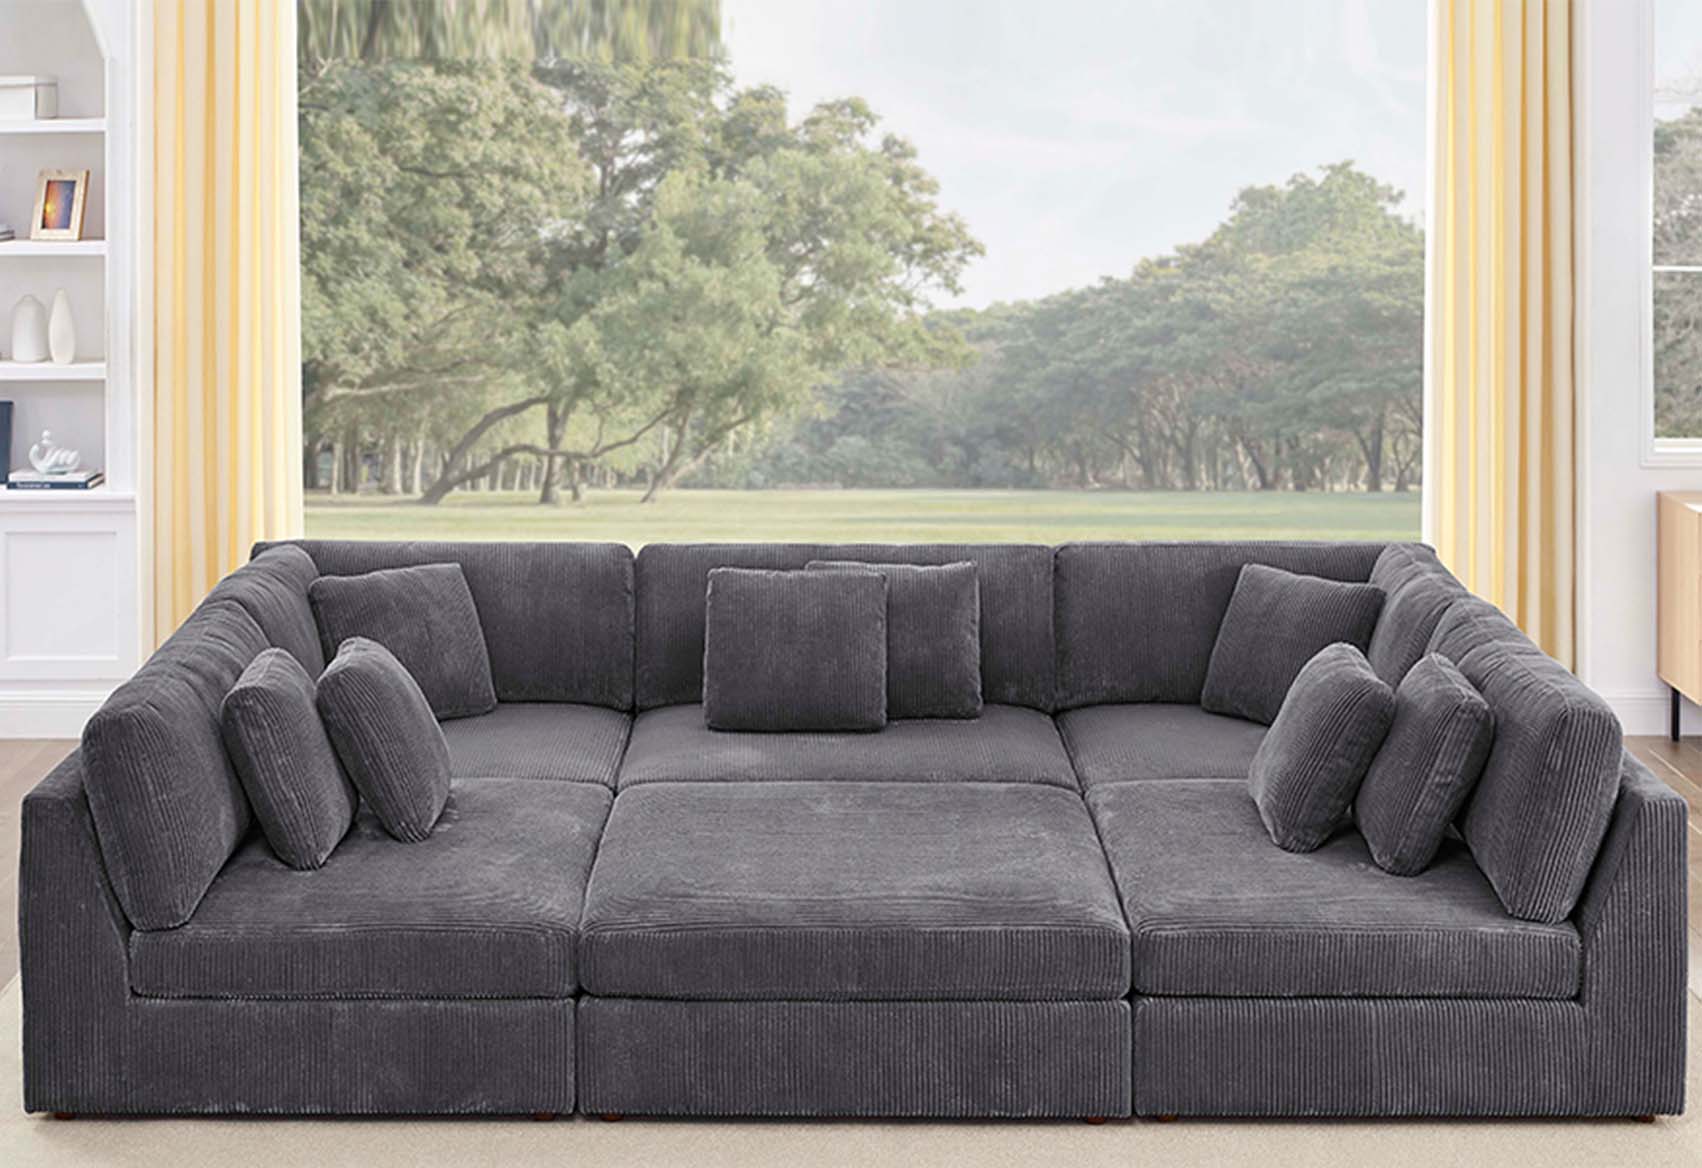 Best Modular Sectional Sofas for Small Spaces